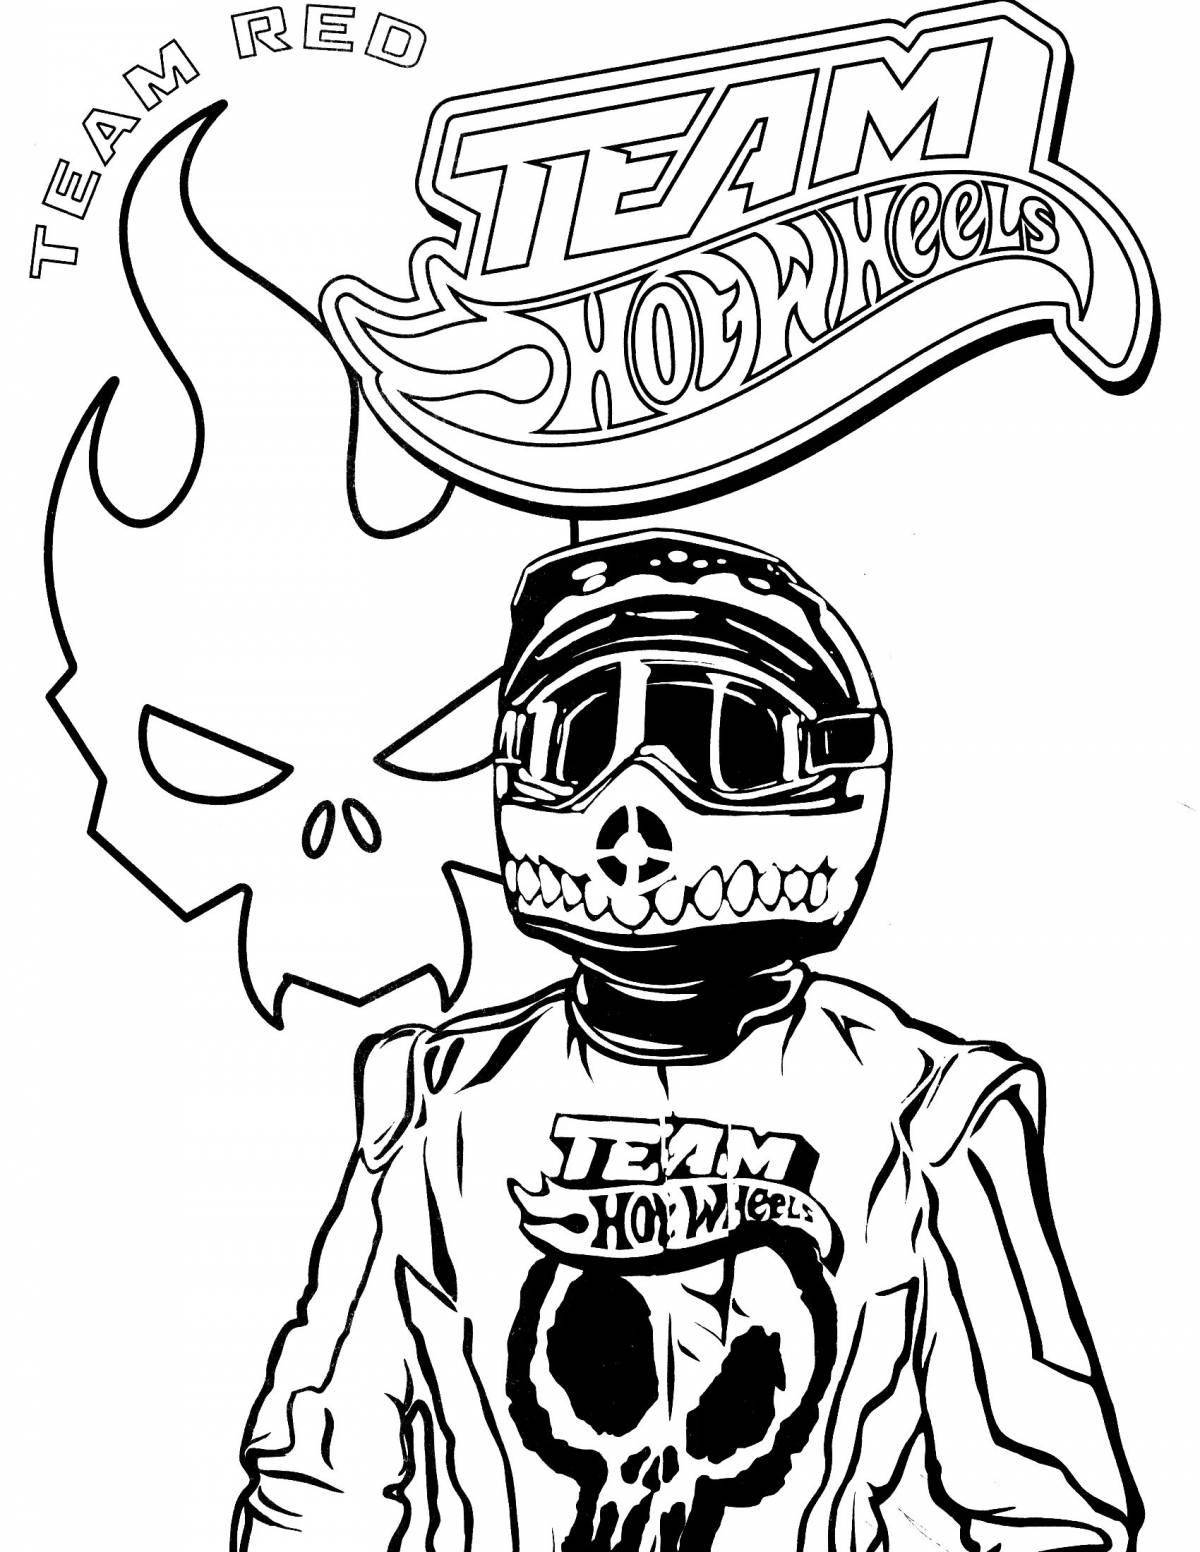 Hot wheels motorcycle coloring page